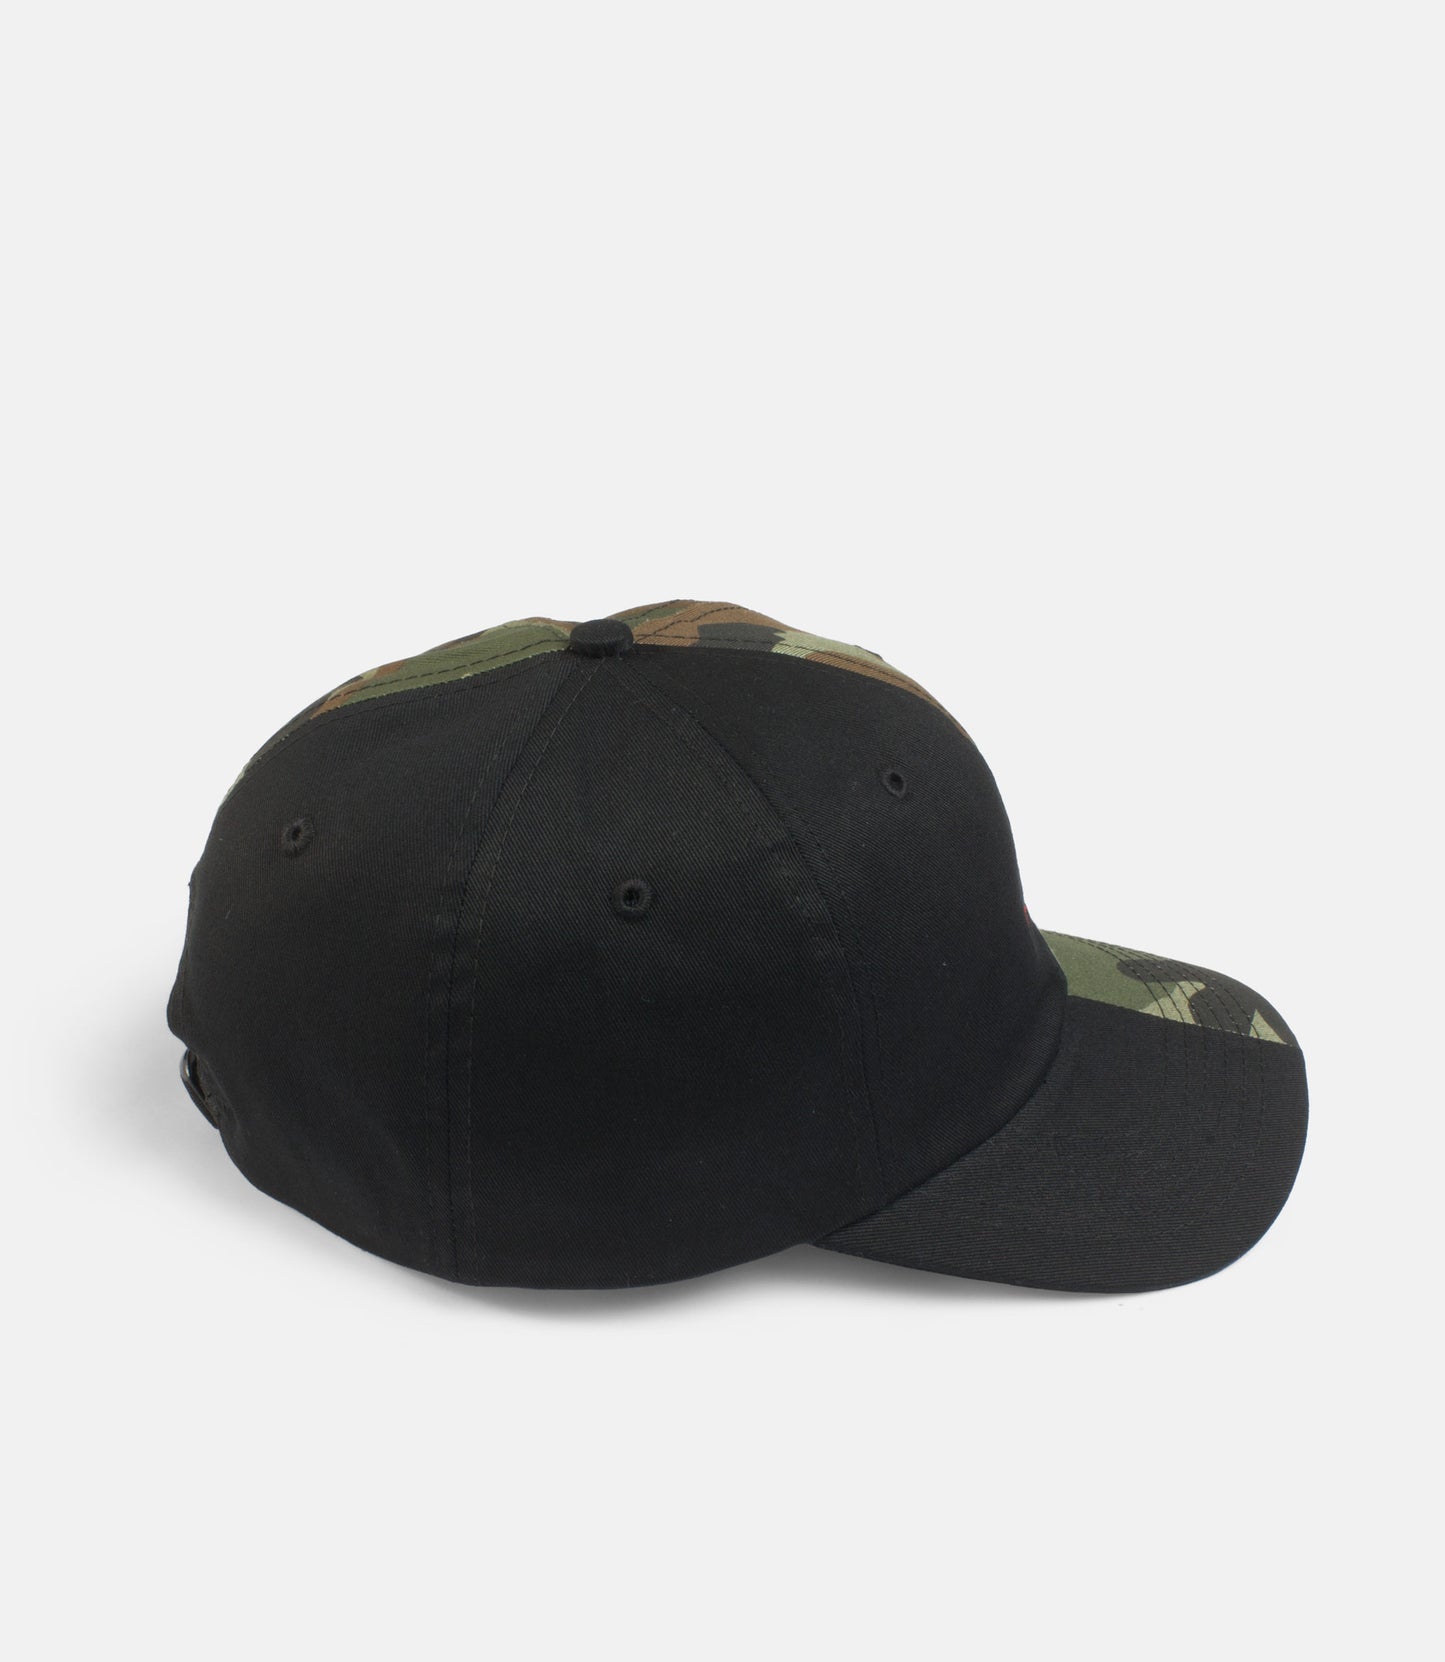 10Deep - Feng Shui Strapback, Faded Woodland - The Giant Peach